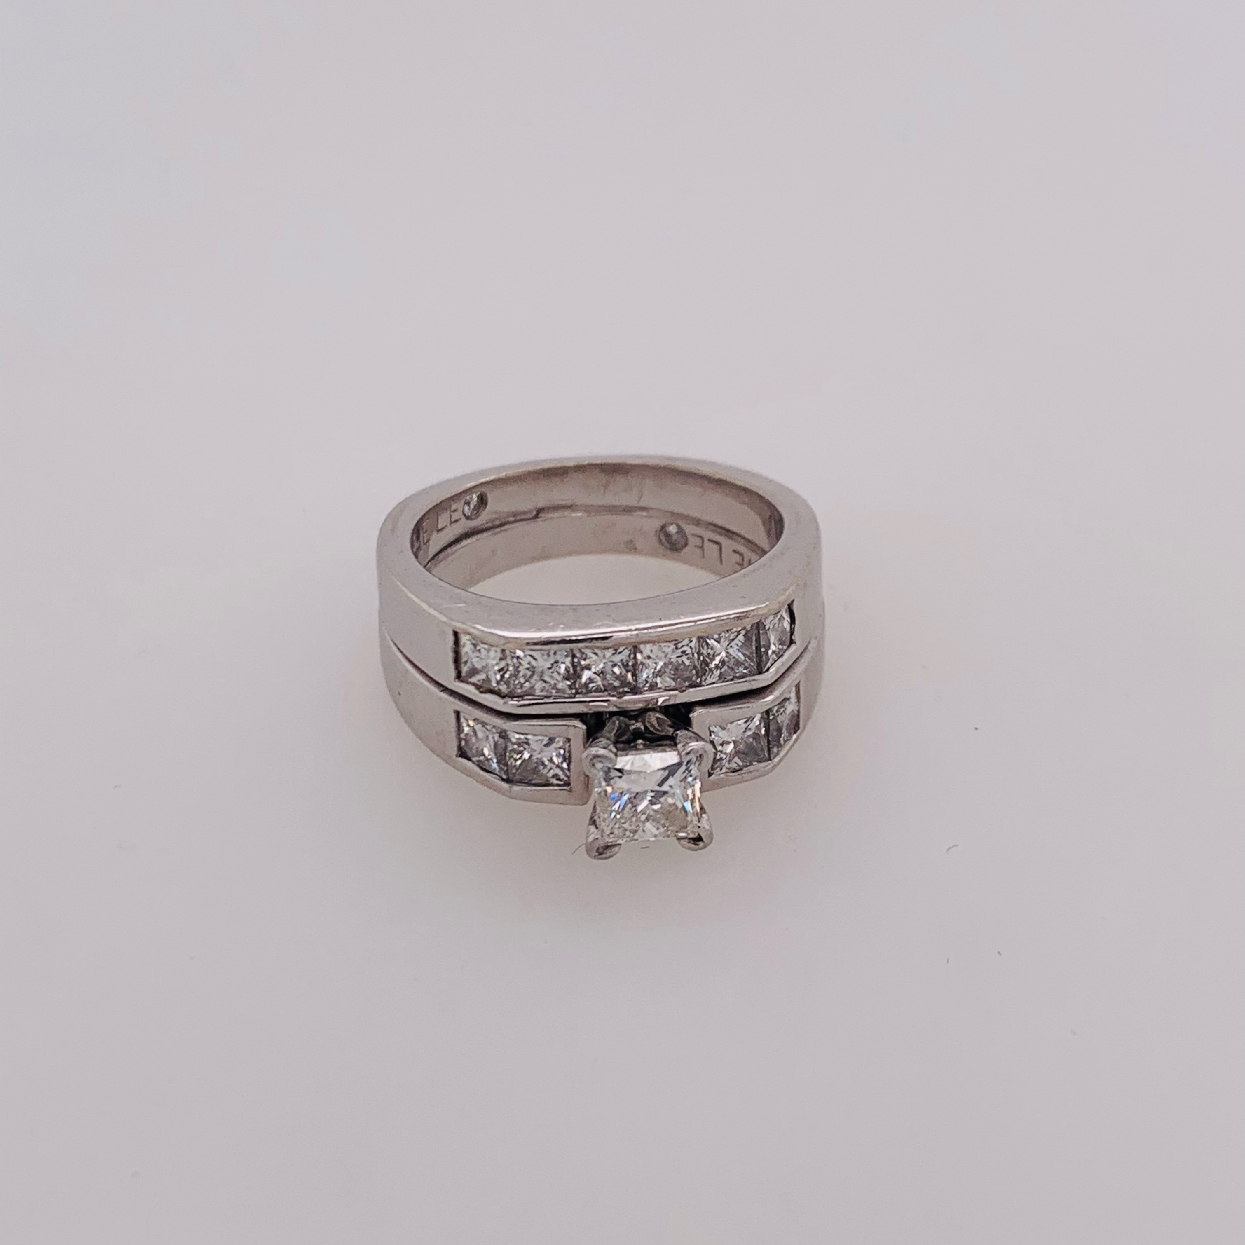 Platinum and 14K White Gold Leo Collection Wedding Set with approximately 1.63 CTTW and 0.51CT Center H/VVS2 Size 5

Comes with Certificate of Authenticity

